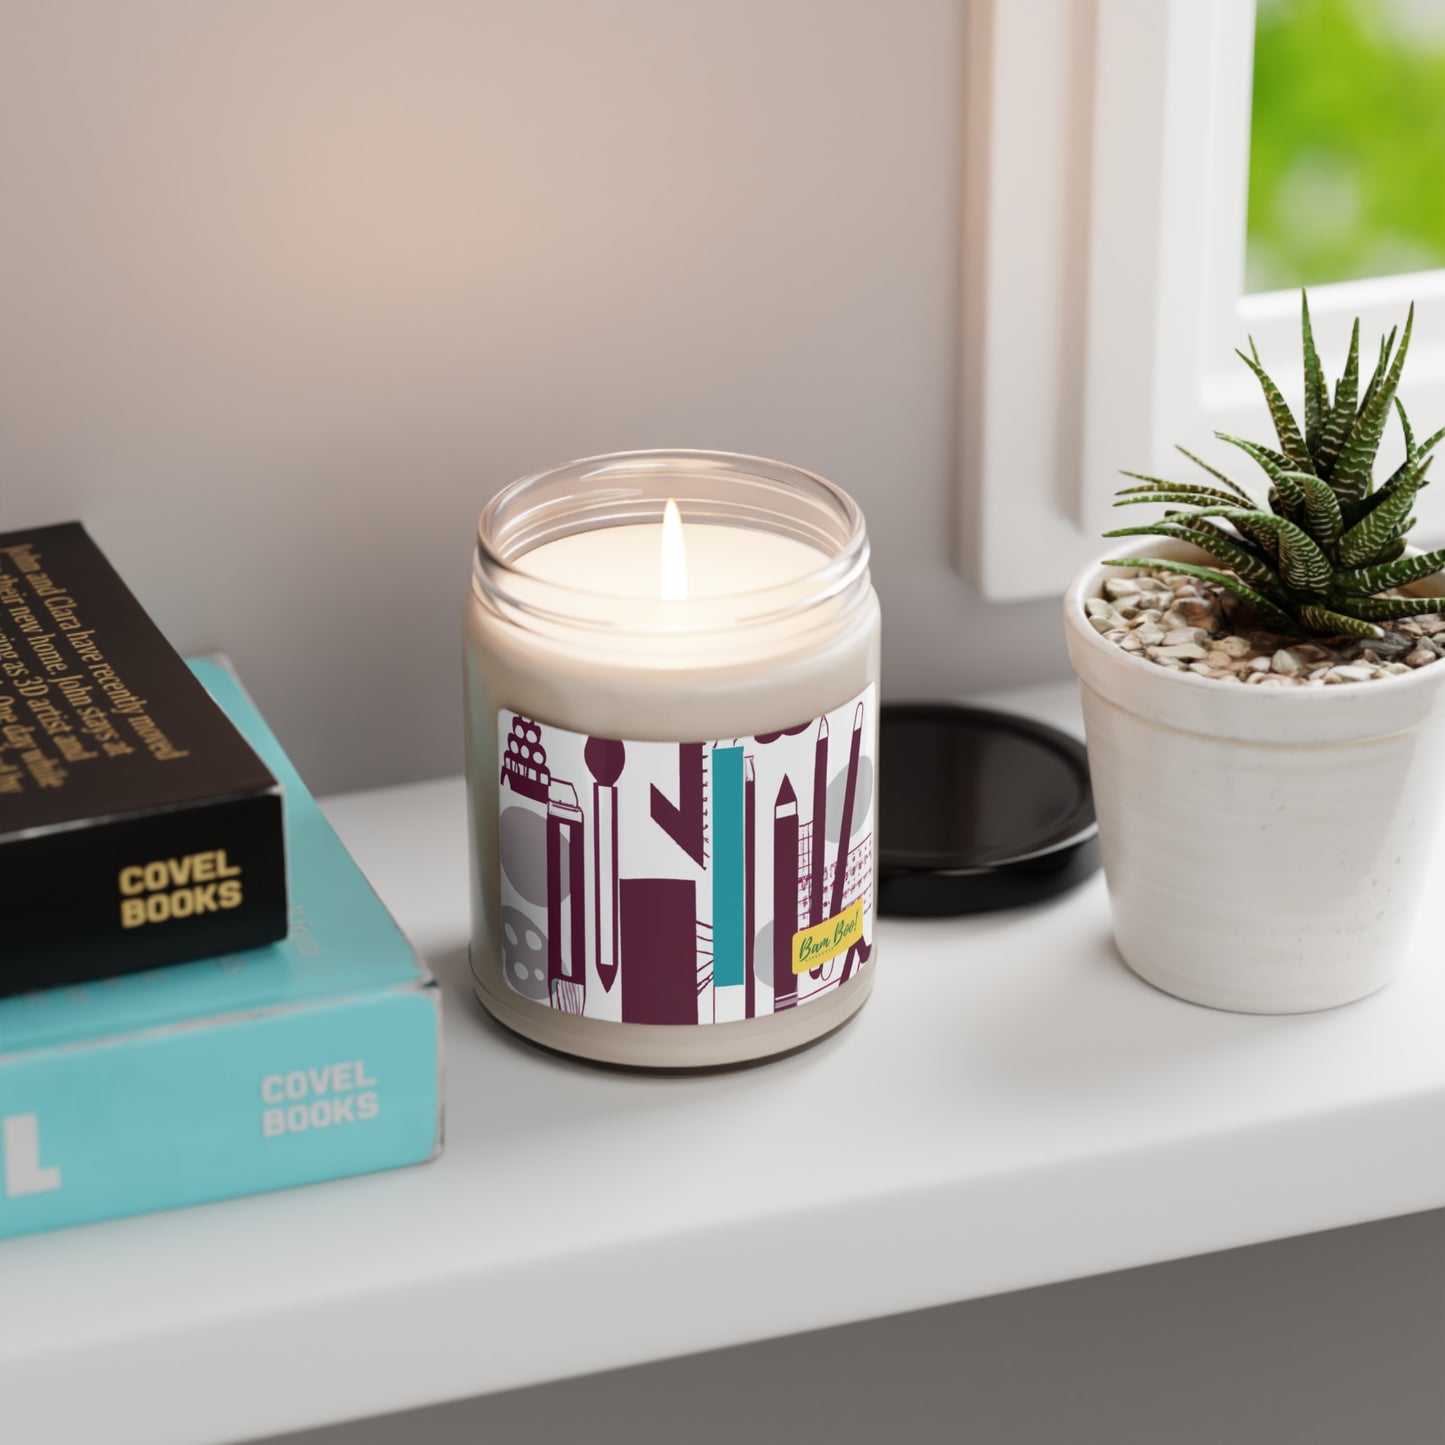 "Self-Reflective Art: Expressing the Inner You" - Bam Boo! Lifestyle Eco-friendly Soy Candle